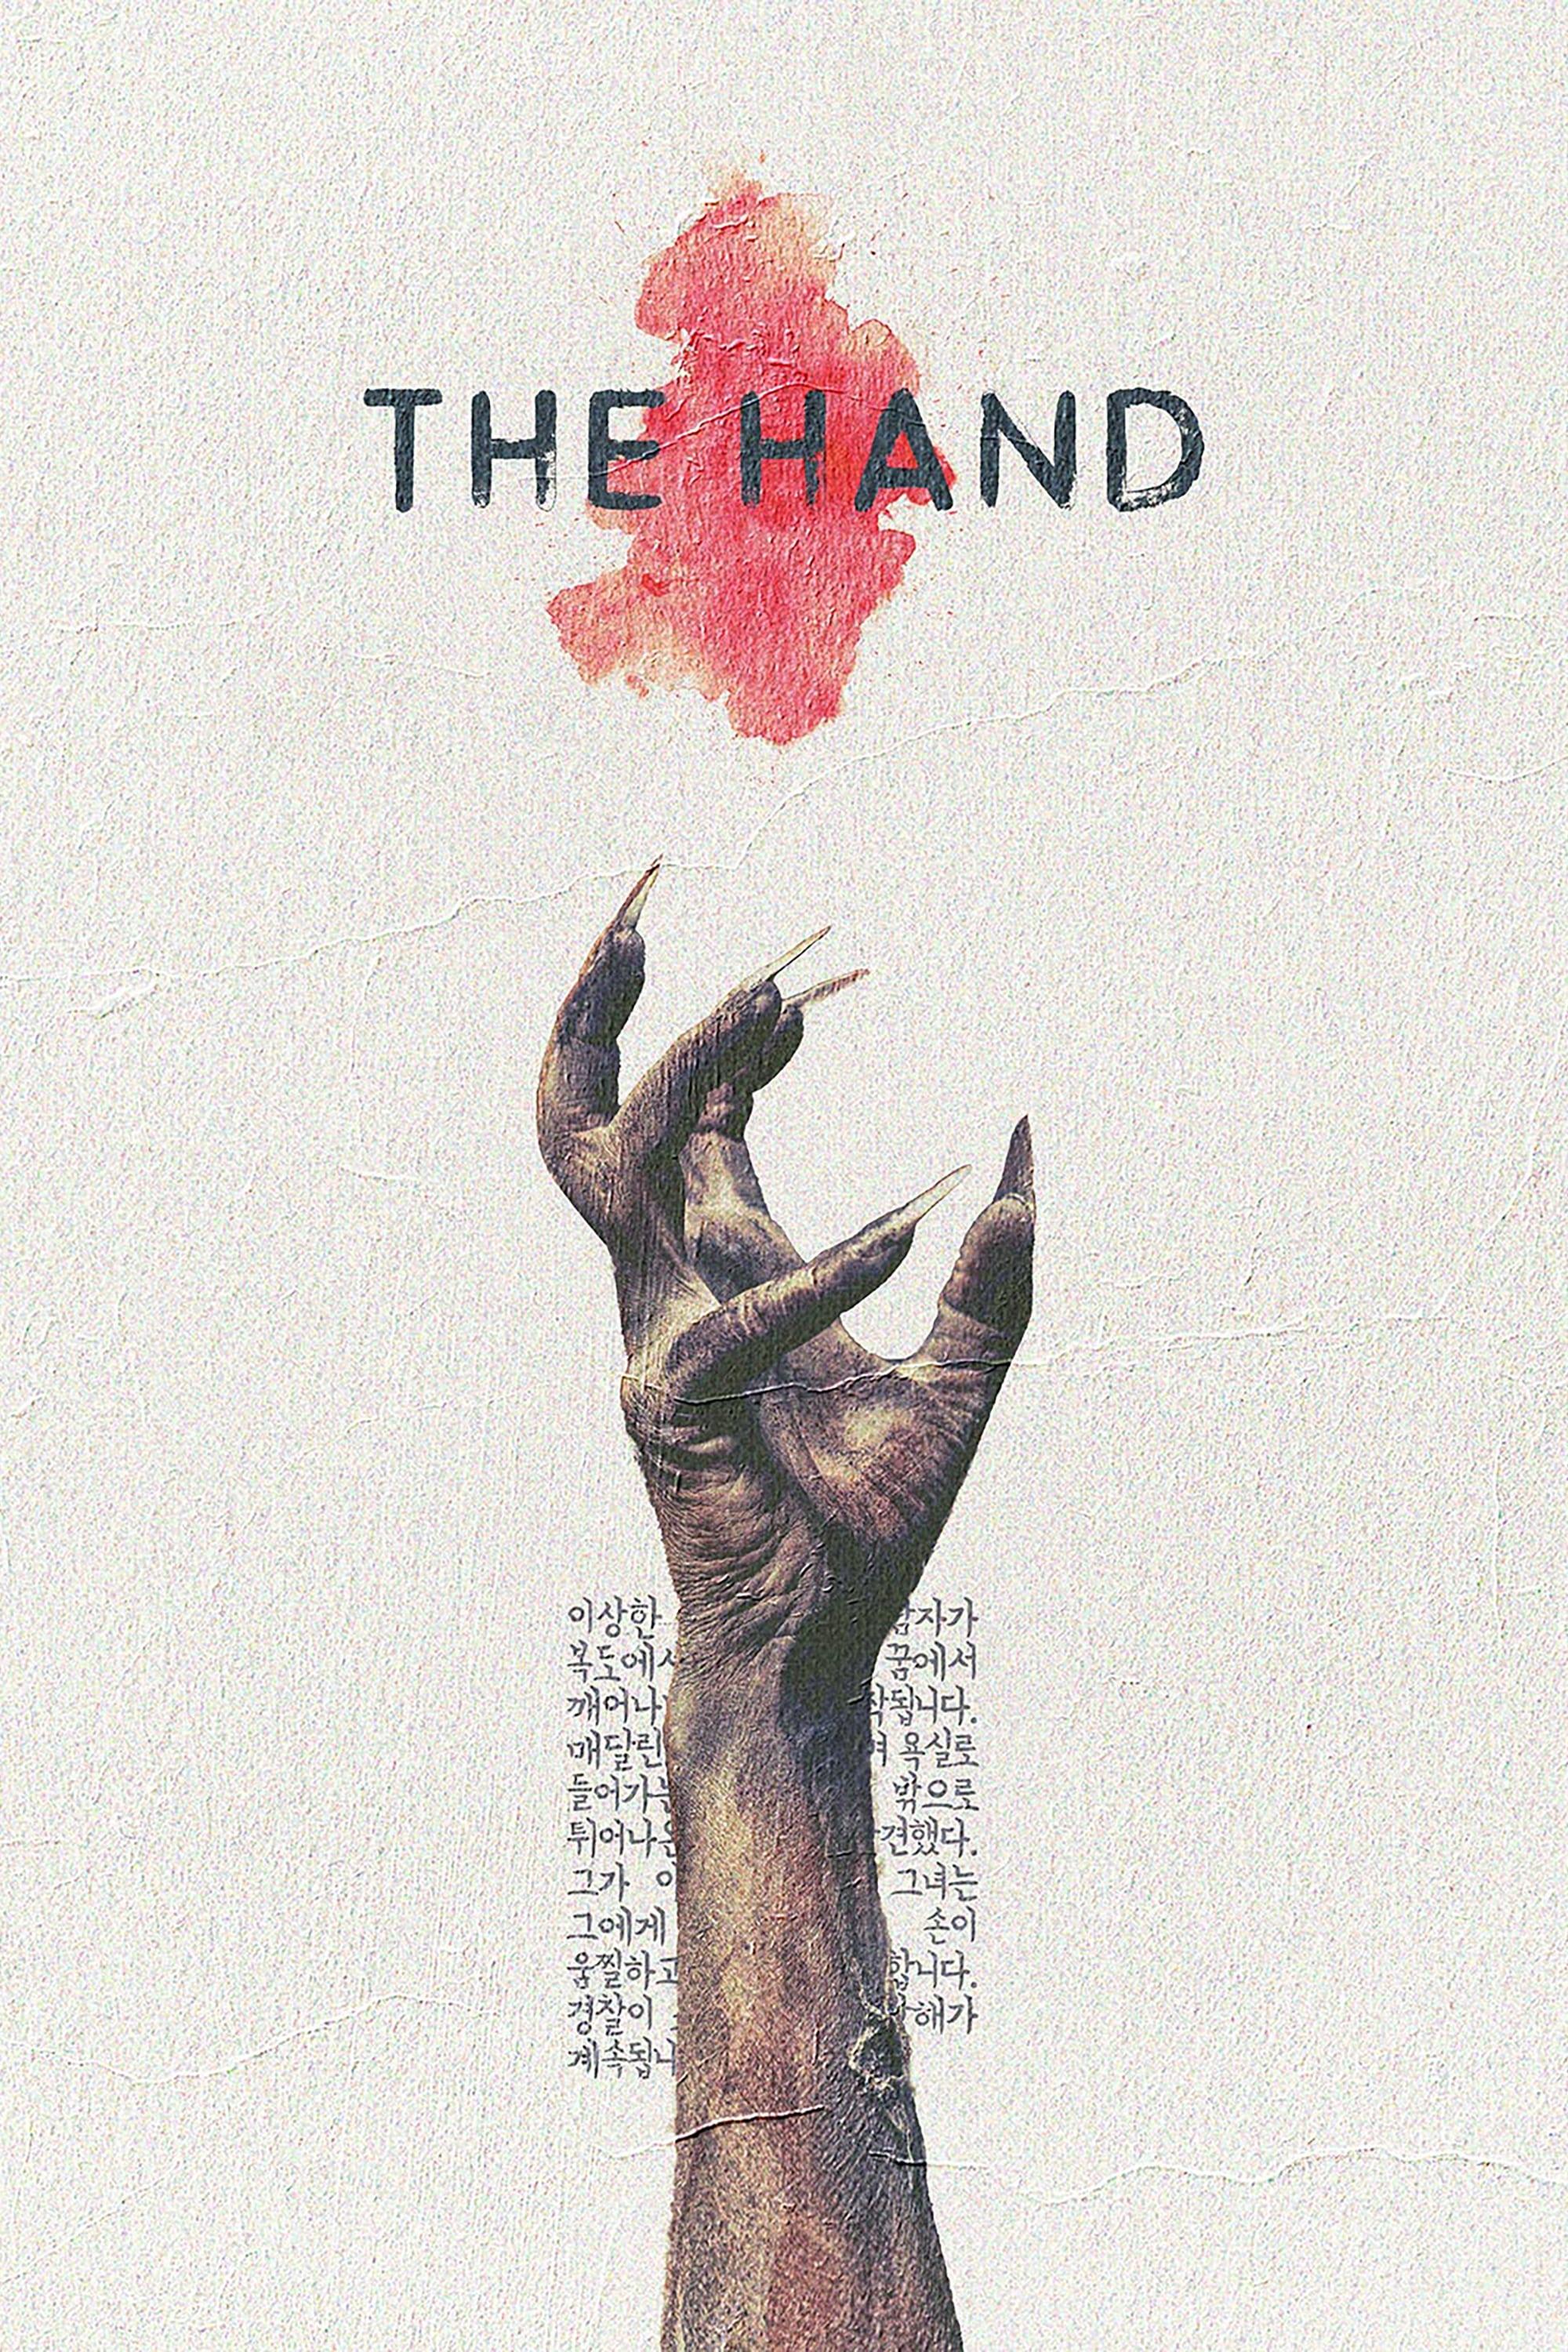 The Hand poster